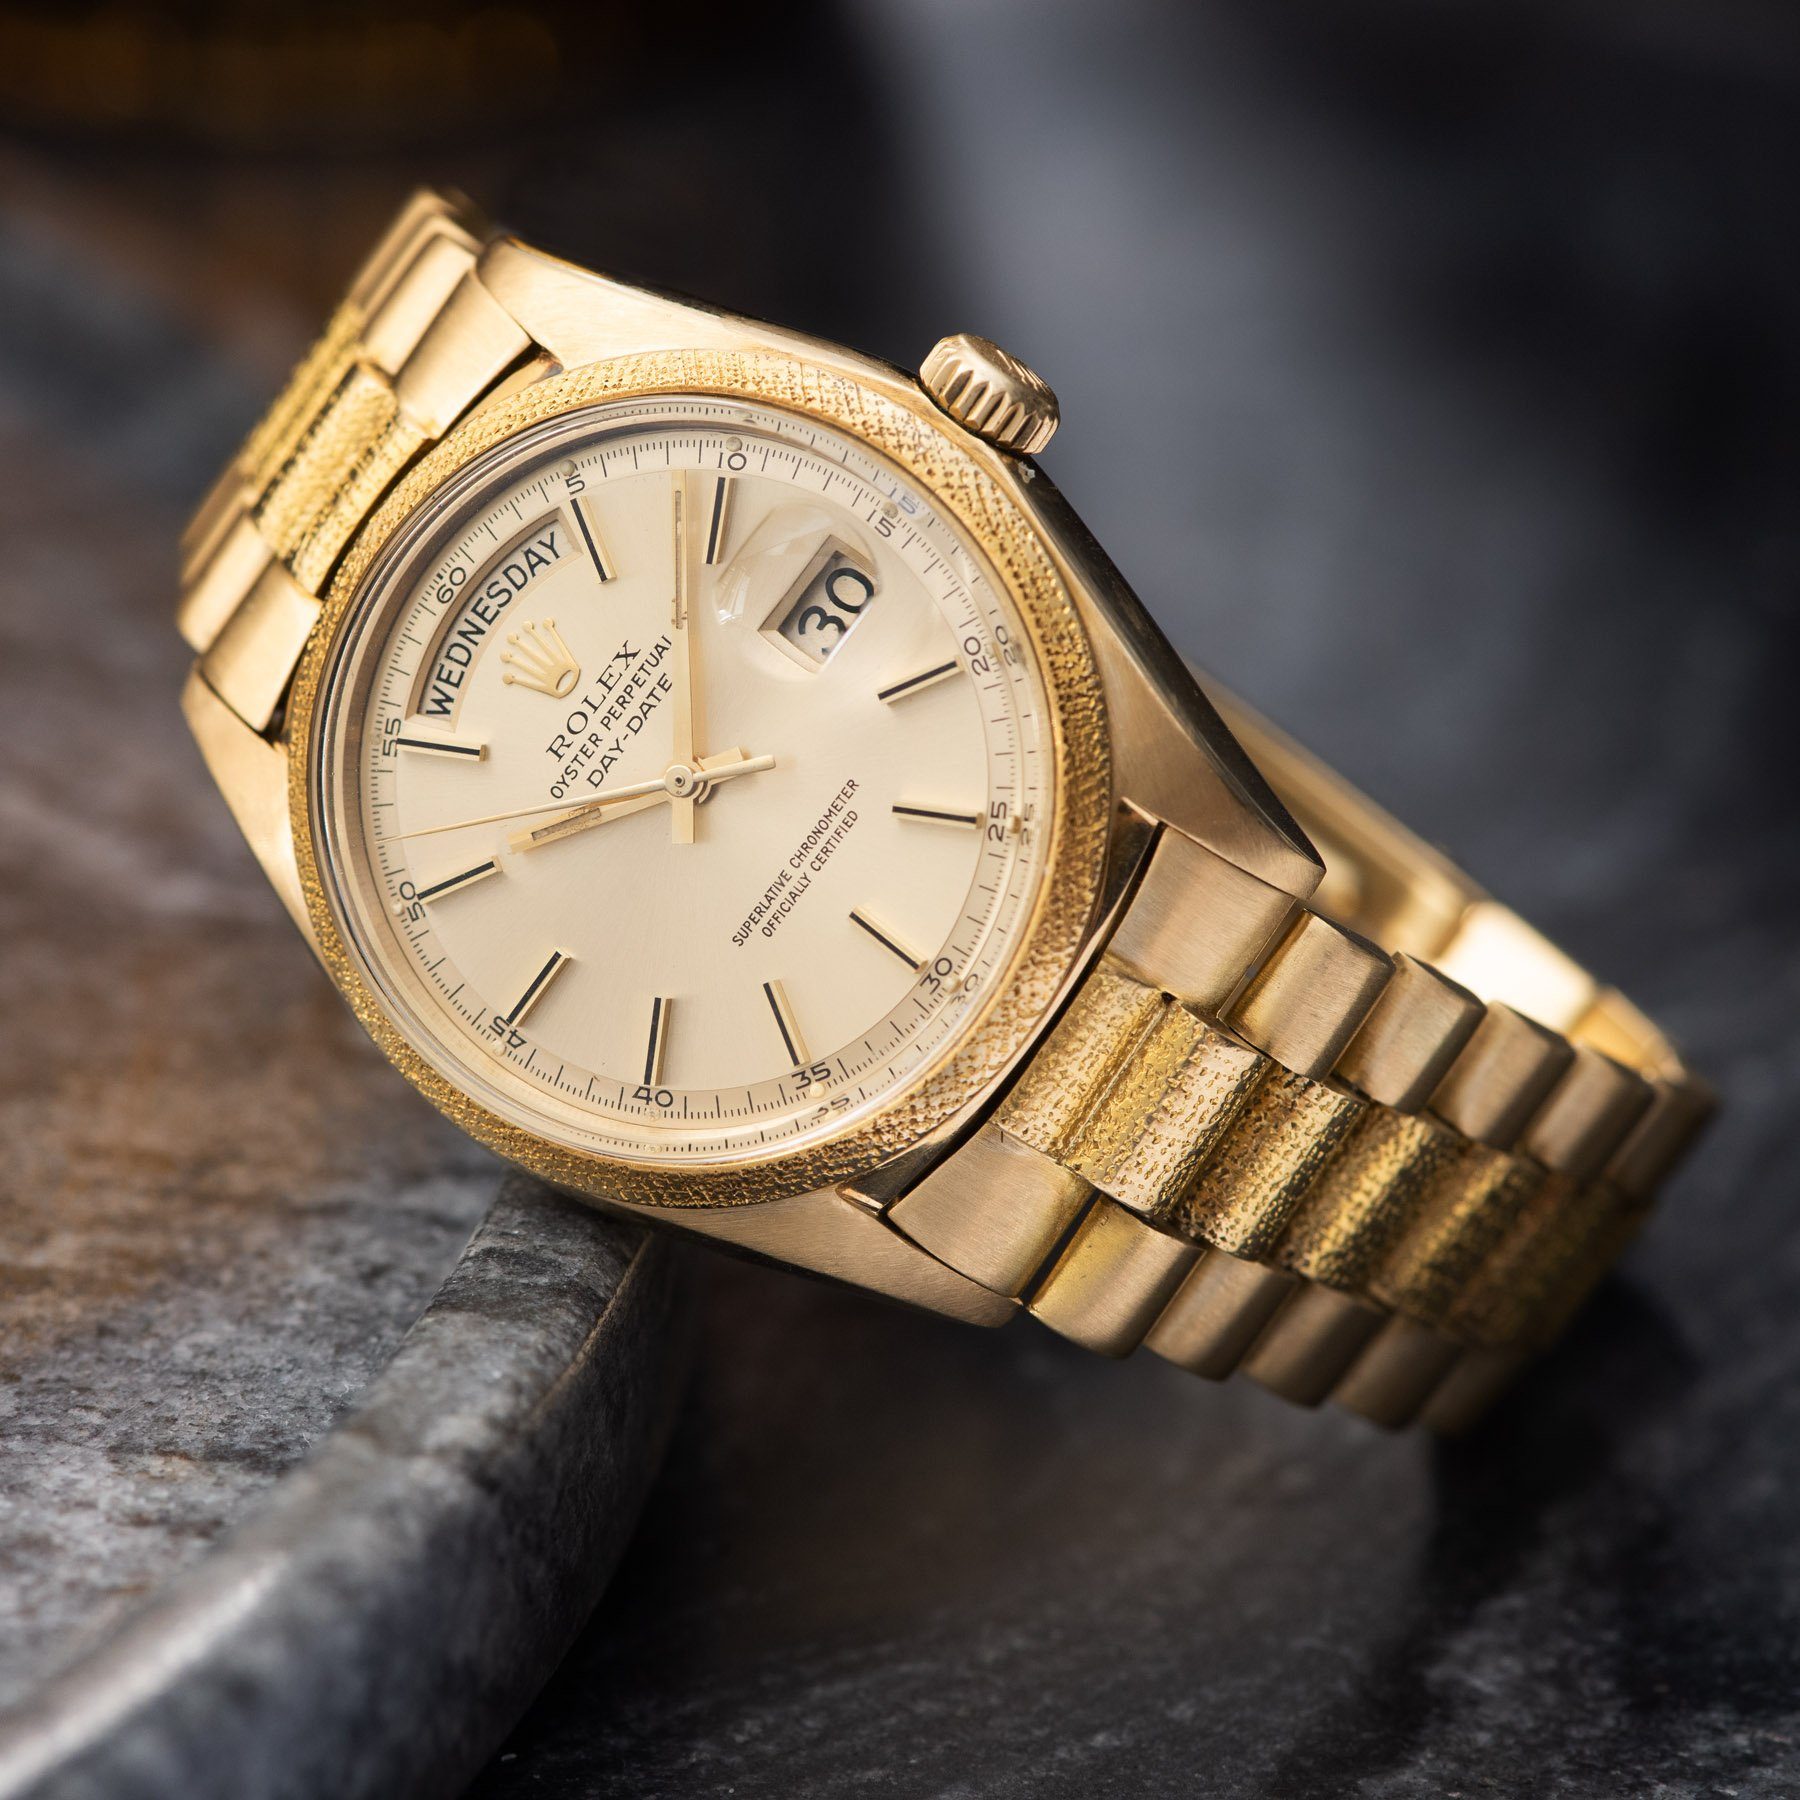 Rolex Day Date Yellow Gold Morellis Finish 1811 with Morellis or Moire finish on the bezel